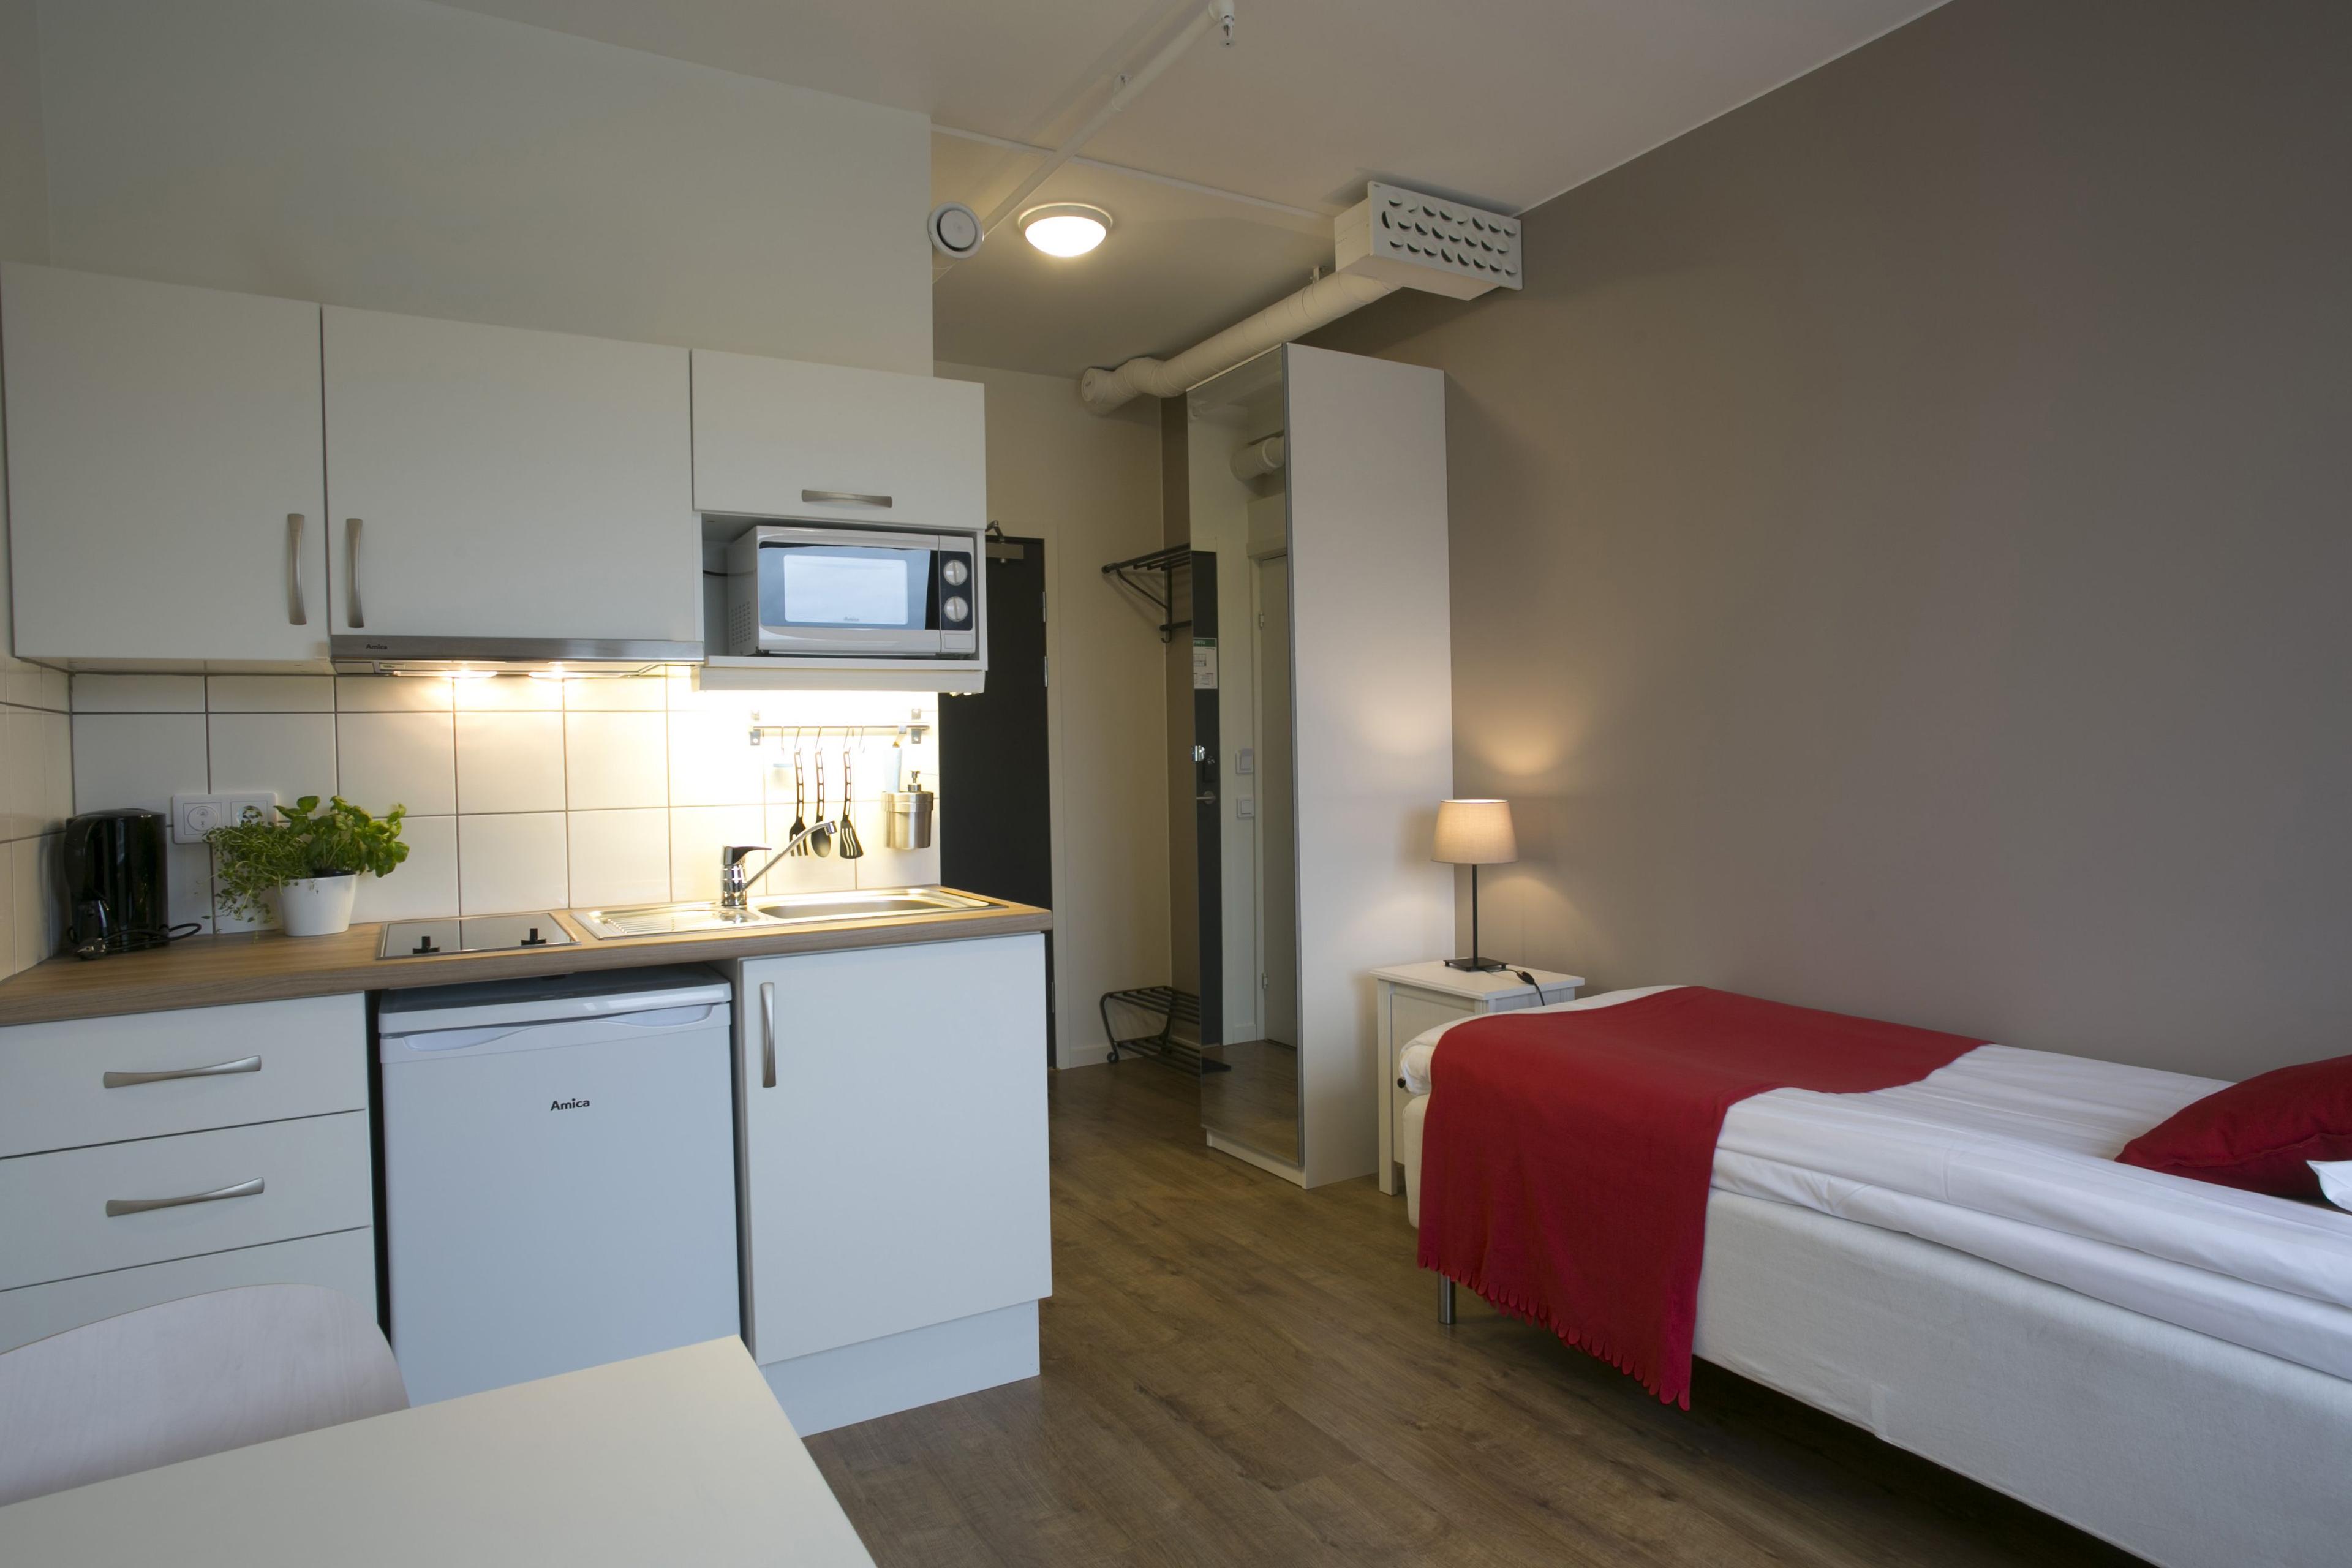 Our studio apartments is 17-19 sqm with fully equipped kitchenette with a stove, fridge with freezing compartment, microwave, kettle and dining table with chairs in a separate sitting area. 1 x 90 cm bed with pillow, duvet and bedlinnen. Modern bathroom with a shower and towels. Free Wi-Fi and Smart-TV in every apartment and wardrobe with mirror door. Laundry room with iron and ironing boards and garbage room on each floor. Free access to the gym Puls & Traning.